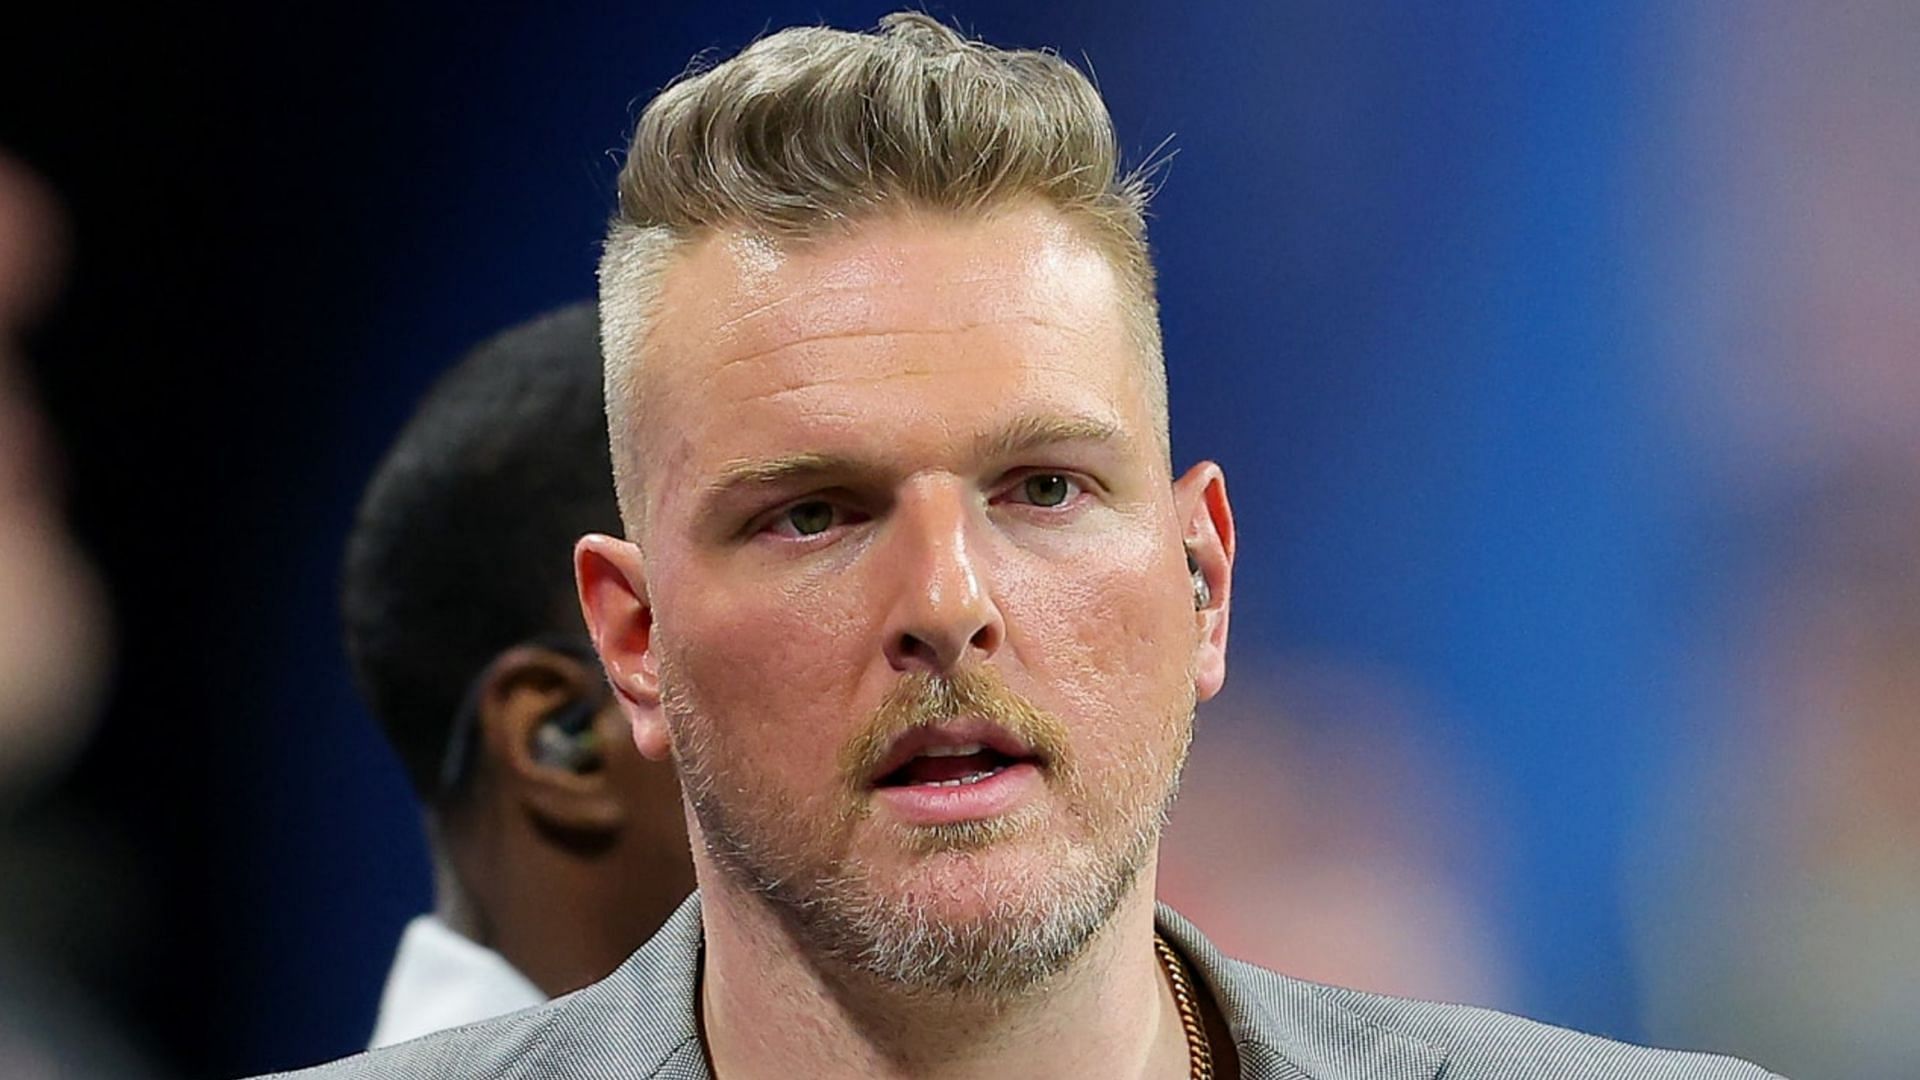 Pat McAfee will bring his eponymous show to ESPN starting fall of 2023. (Image credit: Kevin C. Cox/Getty Images)